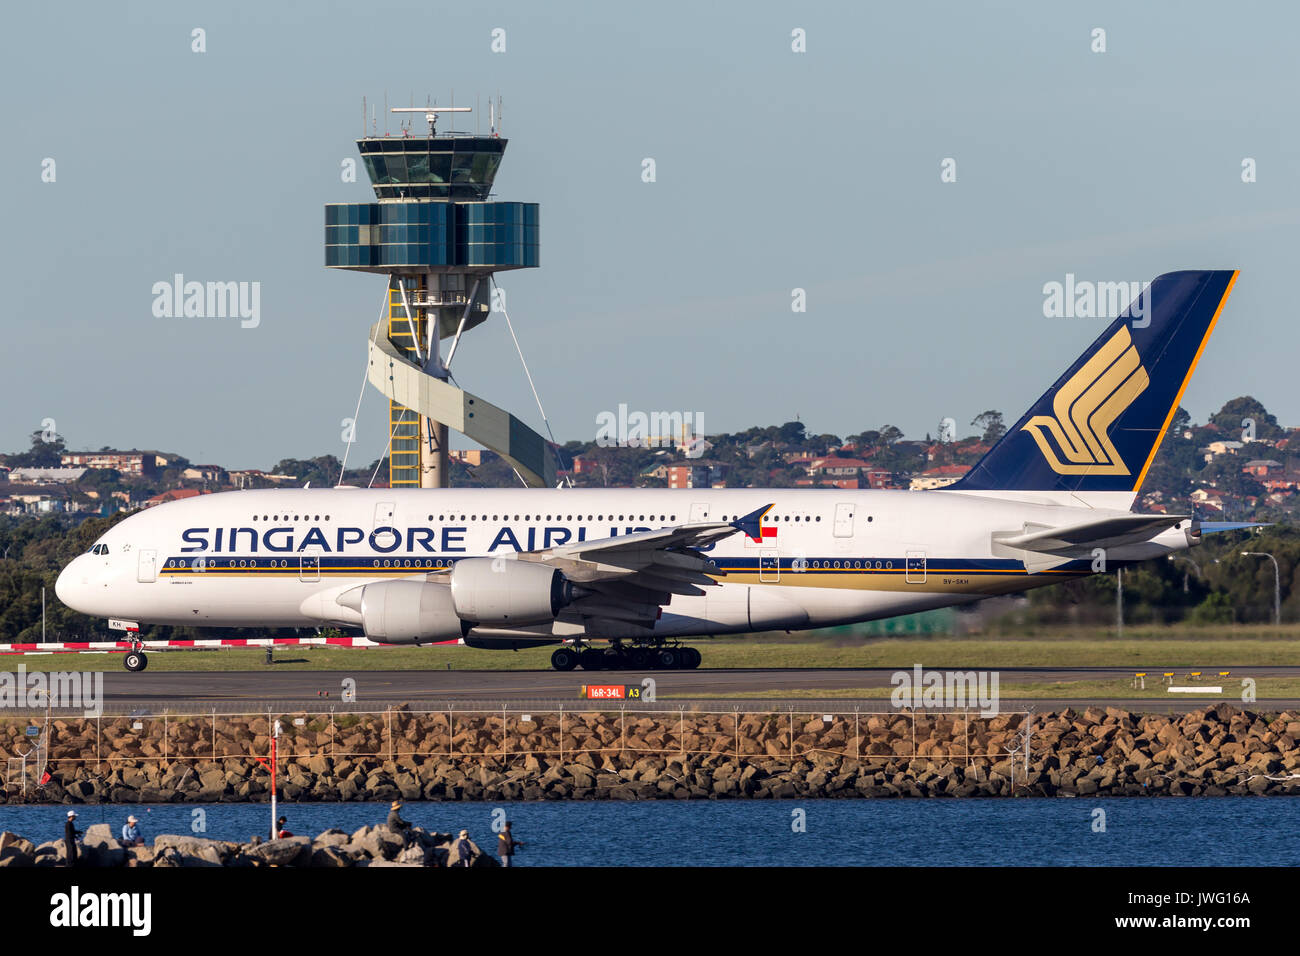 Singapore Airlines Airbus A380 aircraft at Sydney Airport. Stock Photo